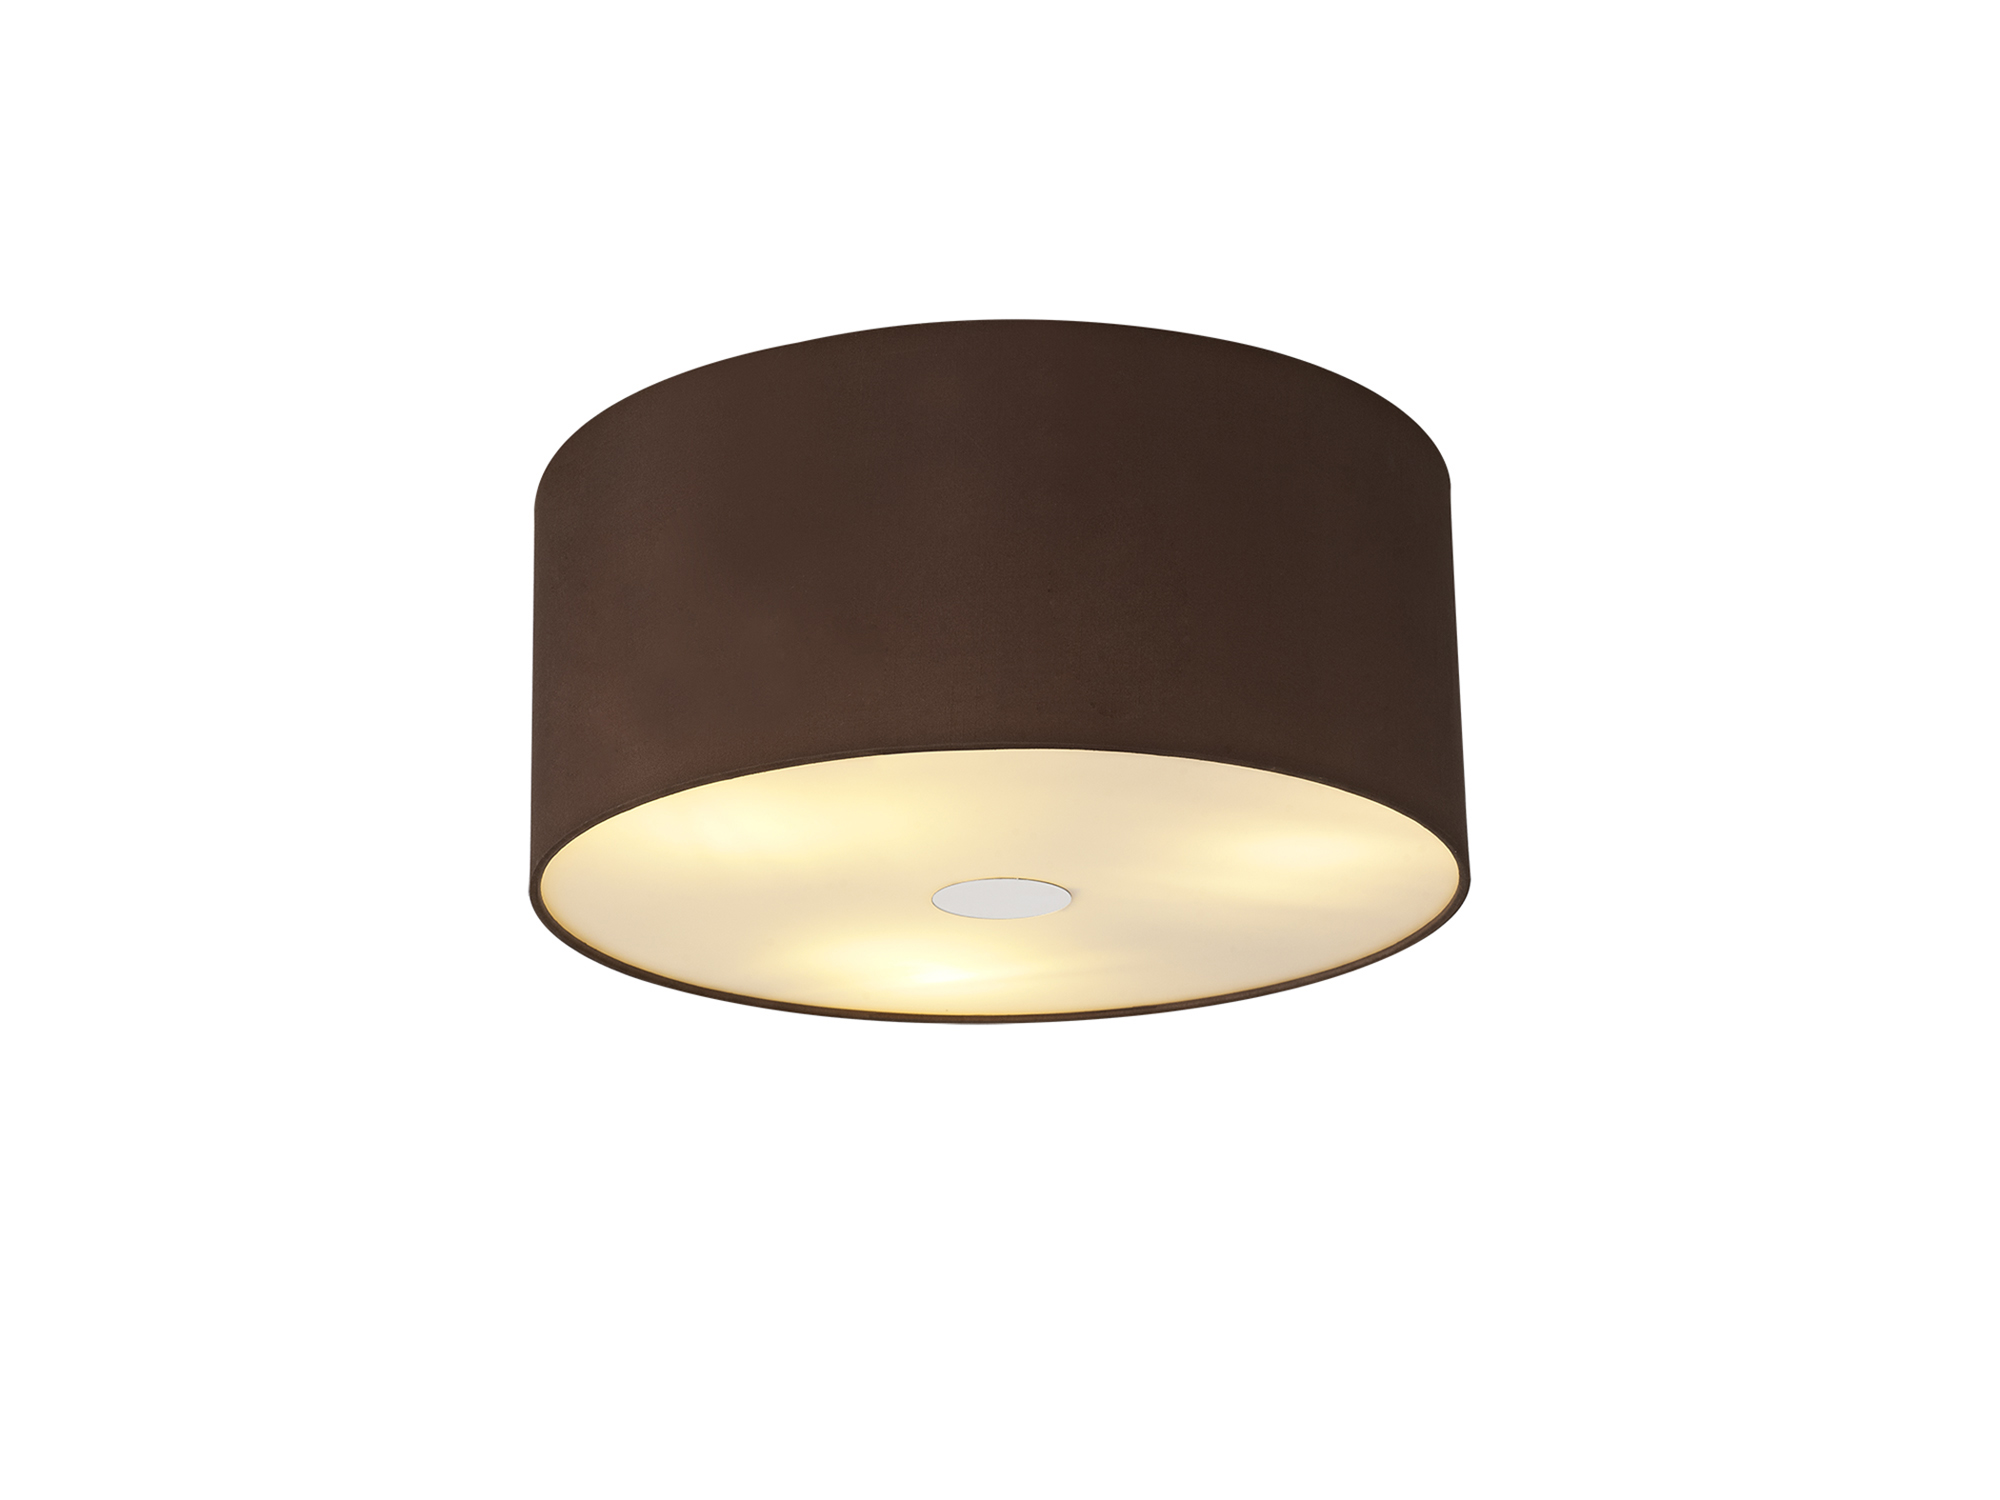 DK0354  Baymont 40cm, Flush 3 Light Polished Chrome, Raw Cocoa/Grecian Bronze, Frosted Diffuser